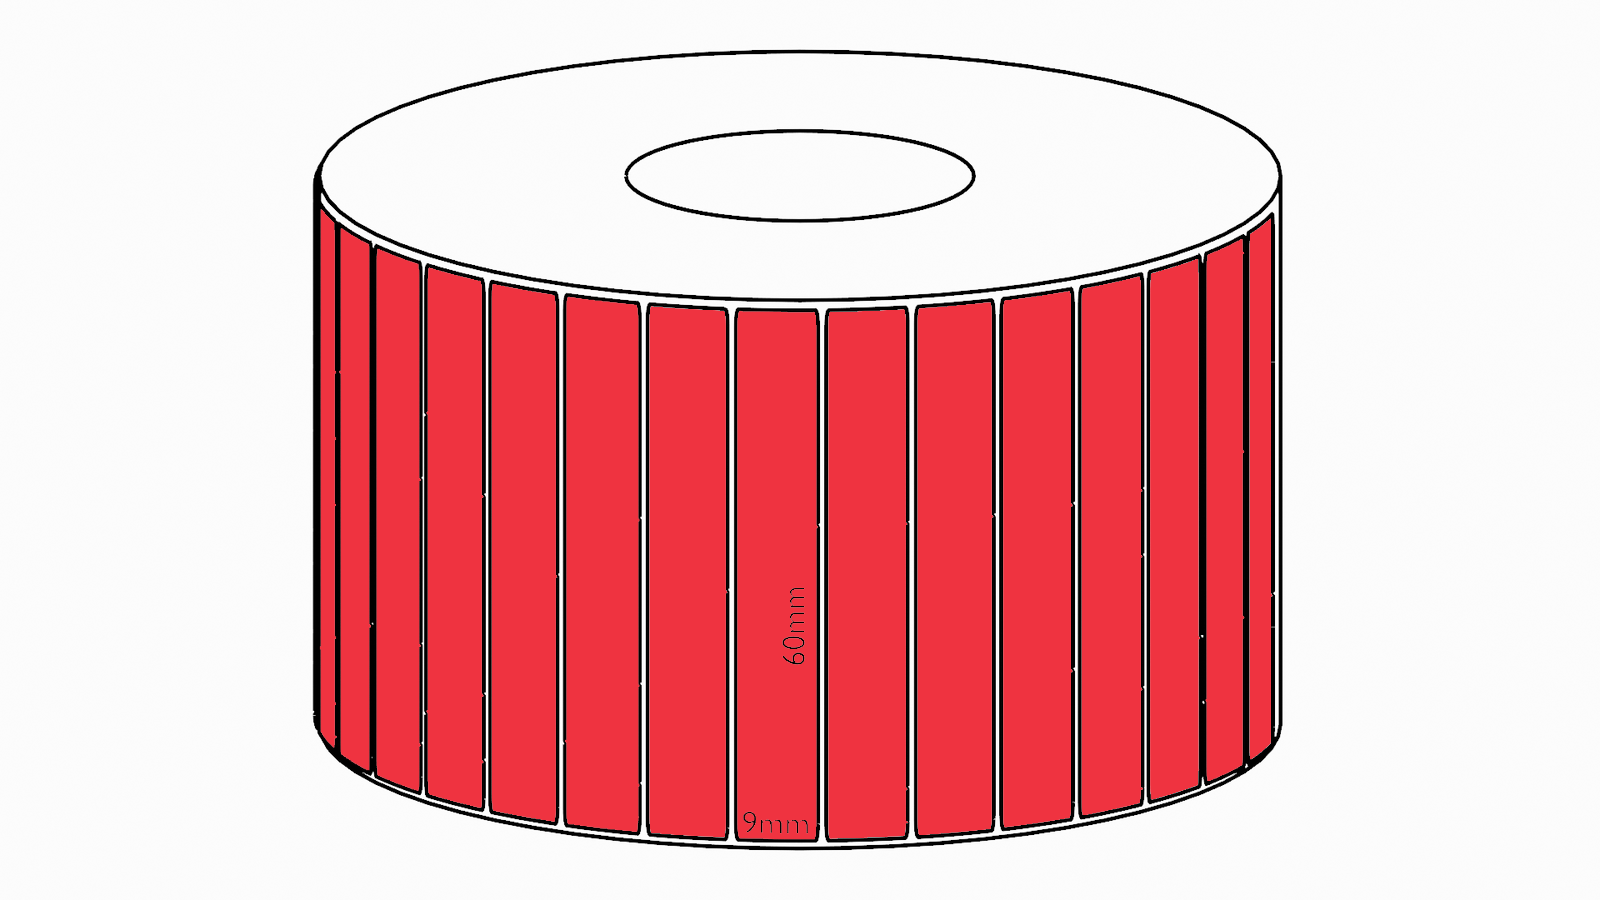 60x9mm Red Direct Thermal Permanent Label, 4150 per roll, 38mm core